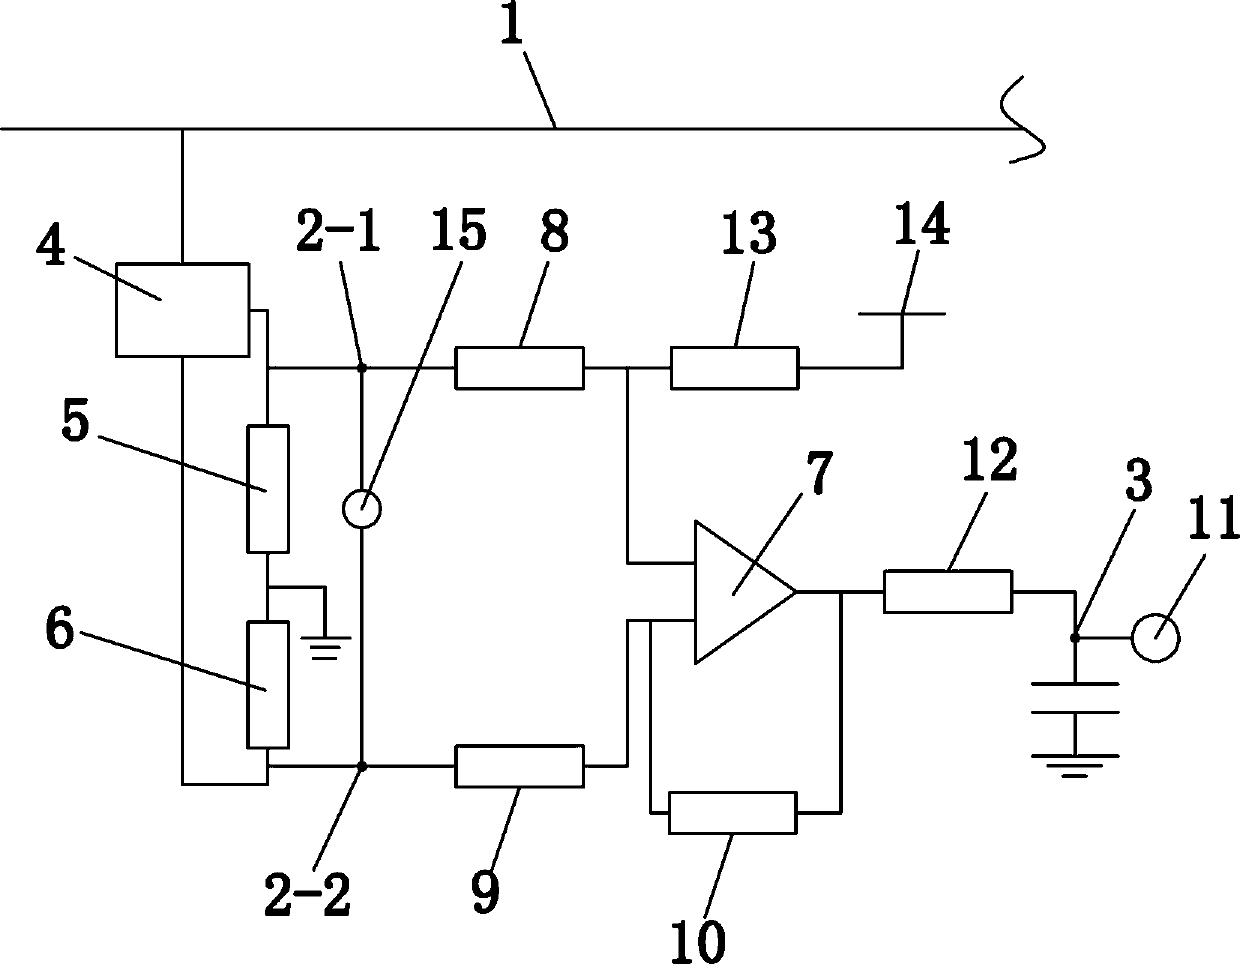 Differential signal and waveform data co-acquisition control system